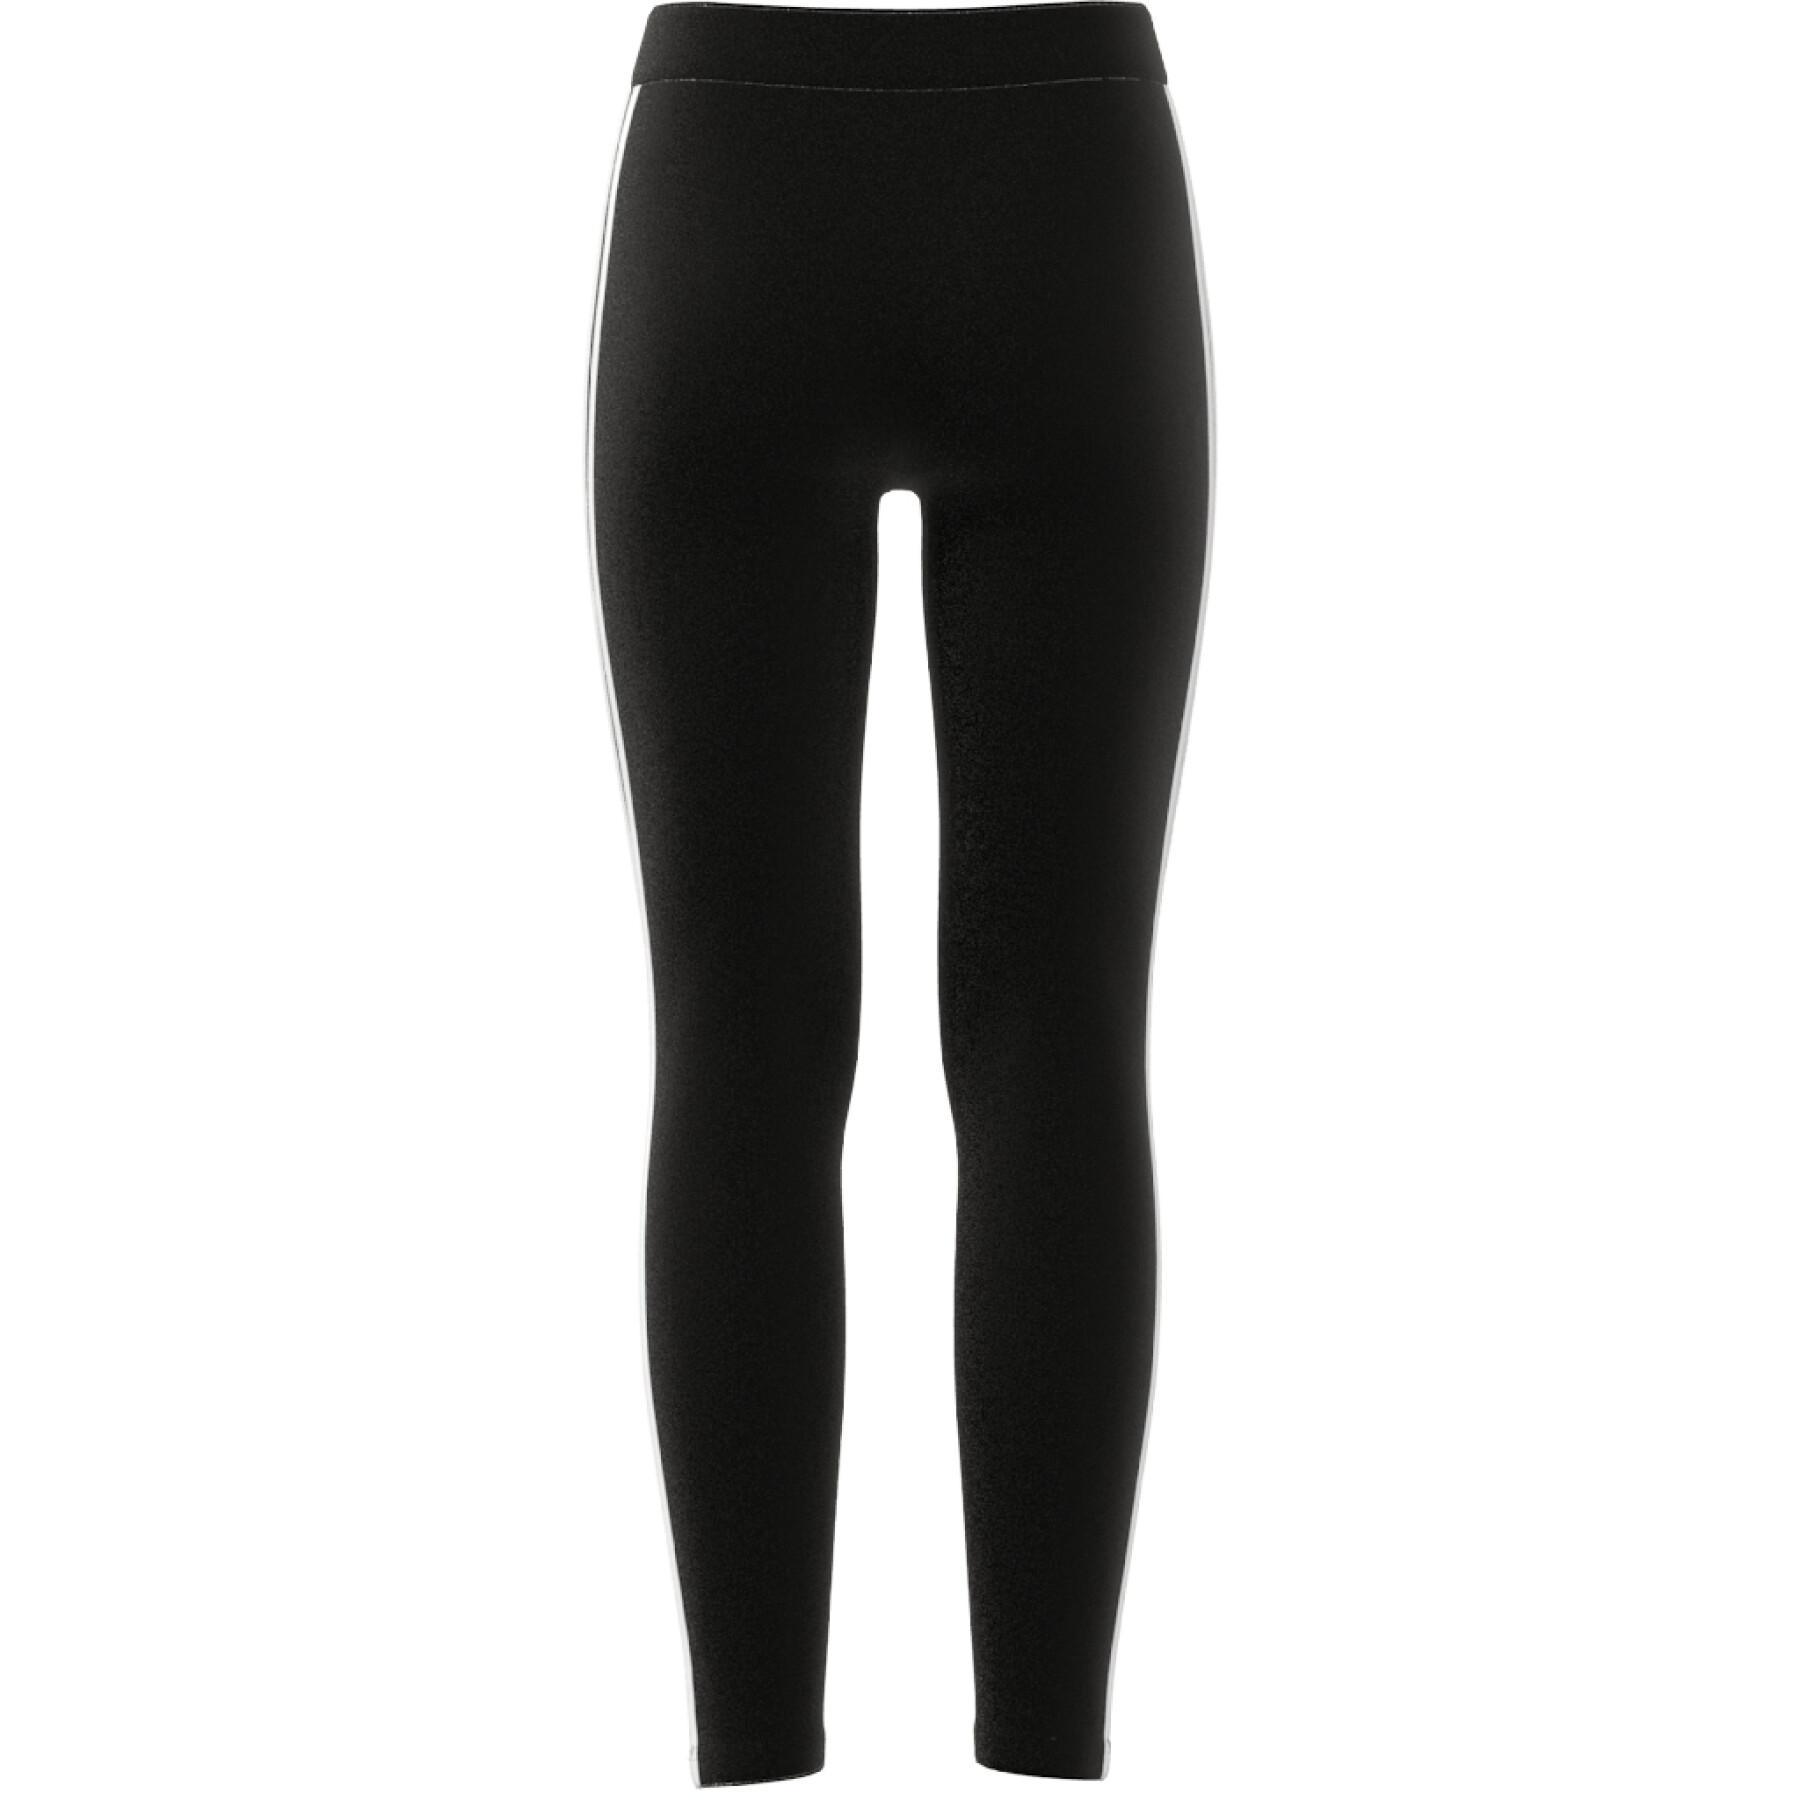 Cotton high waist leggings with side stripes, 7-15 years, black, Adidas  Originals